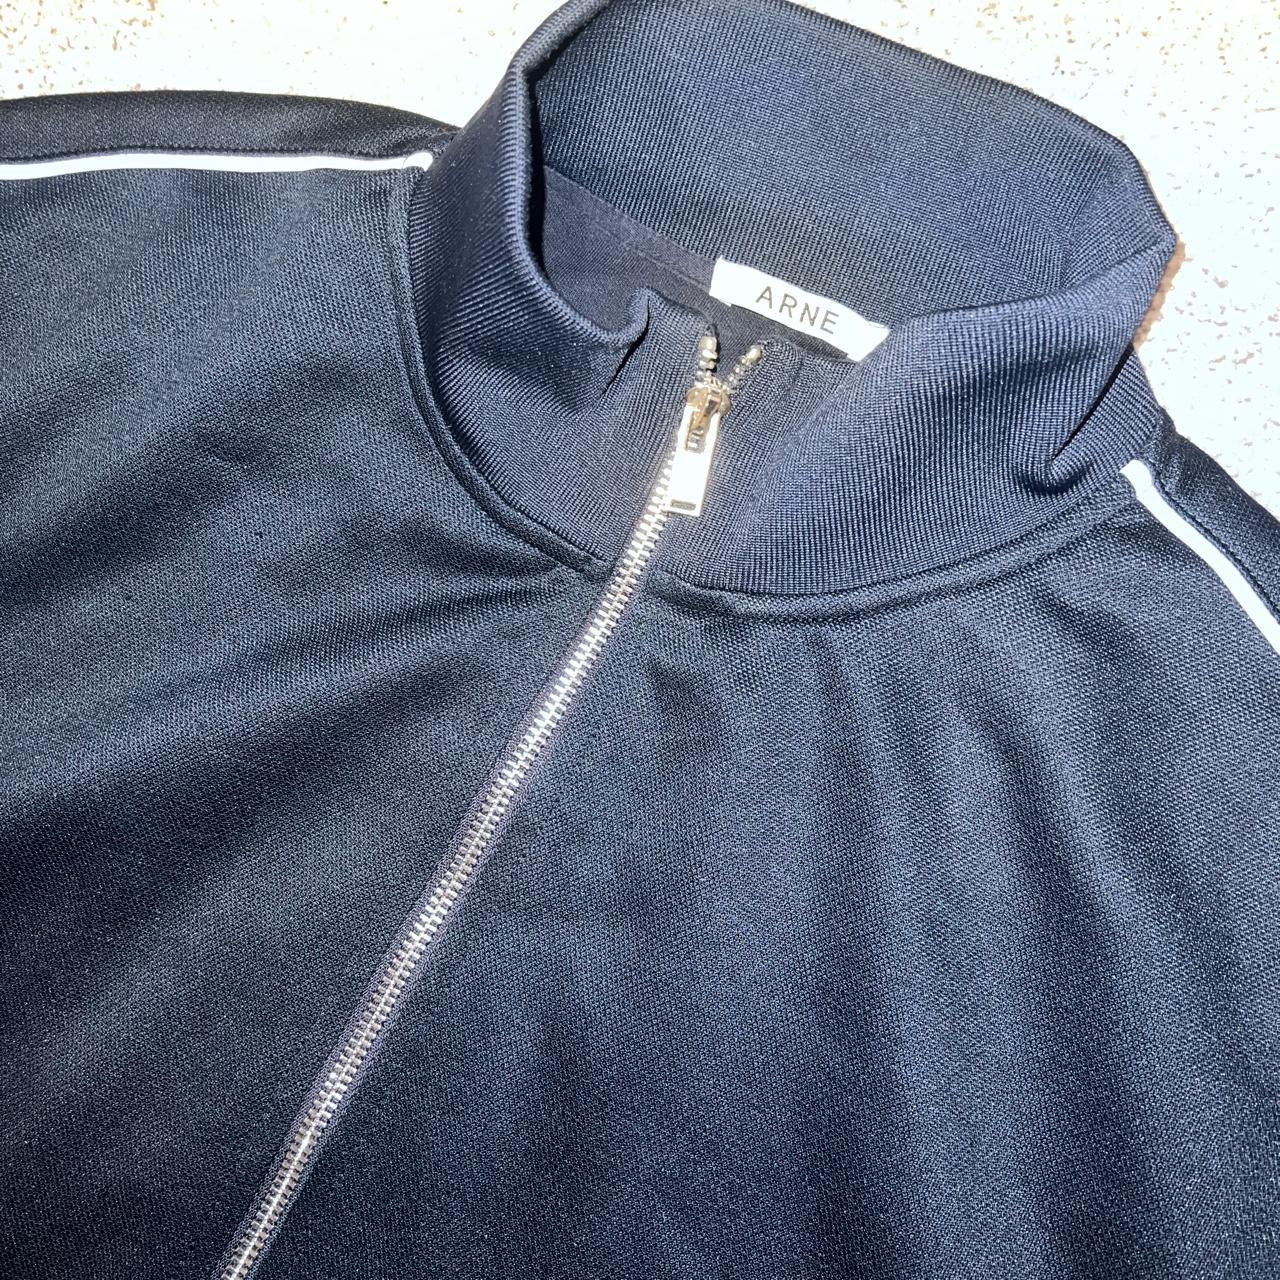 Mens ARNE navy shell tracksuit. Top Size L and... - Depop